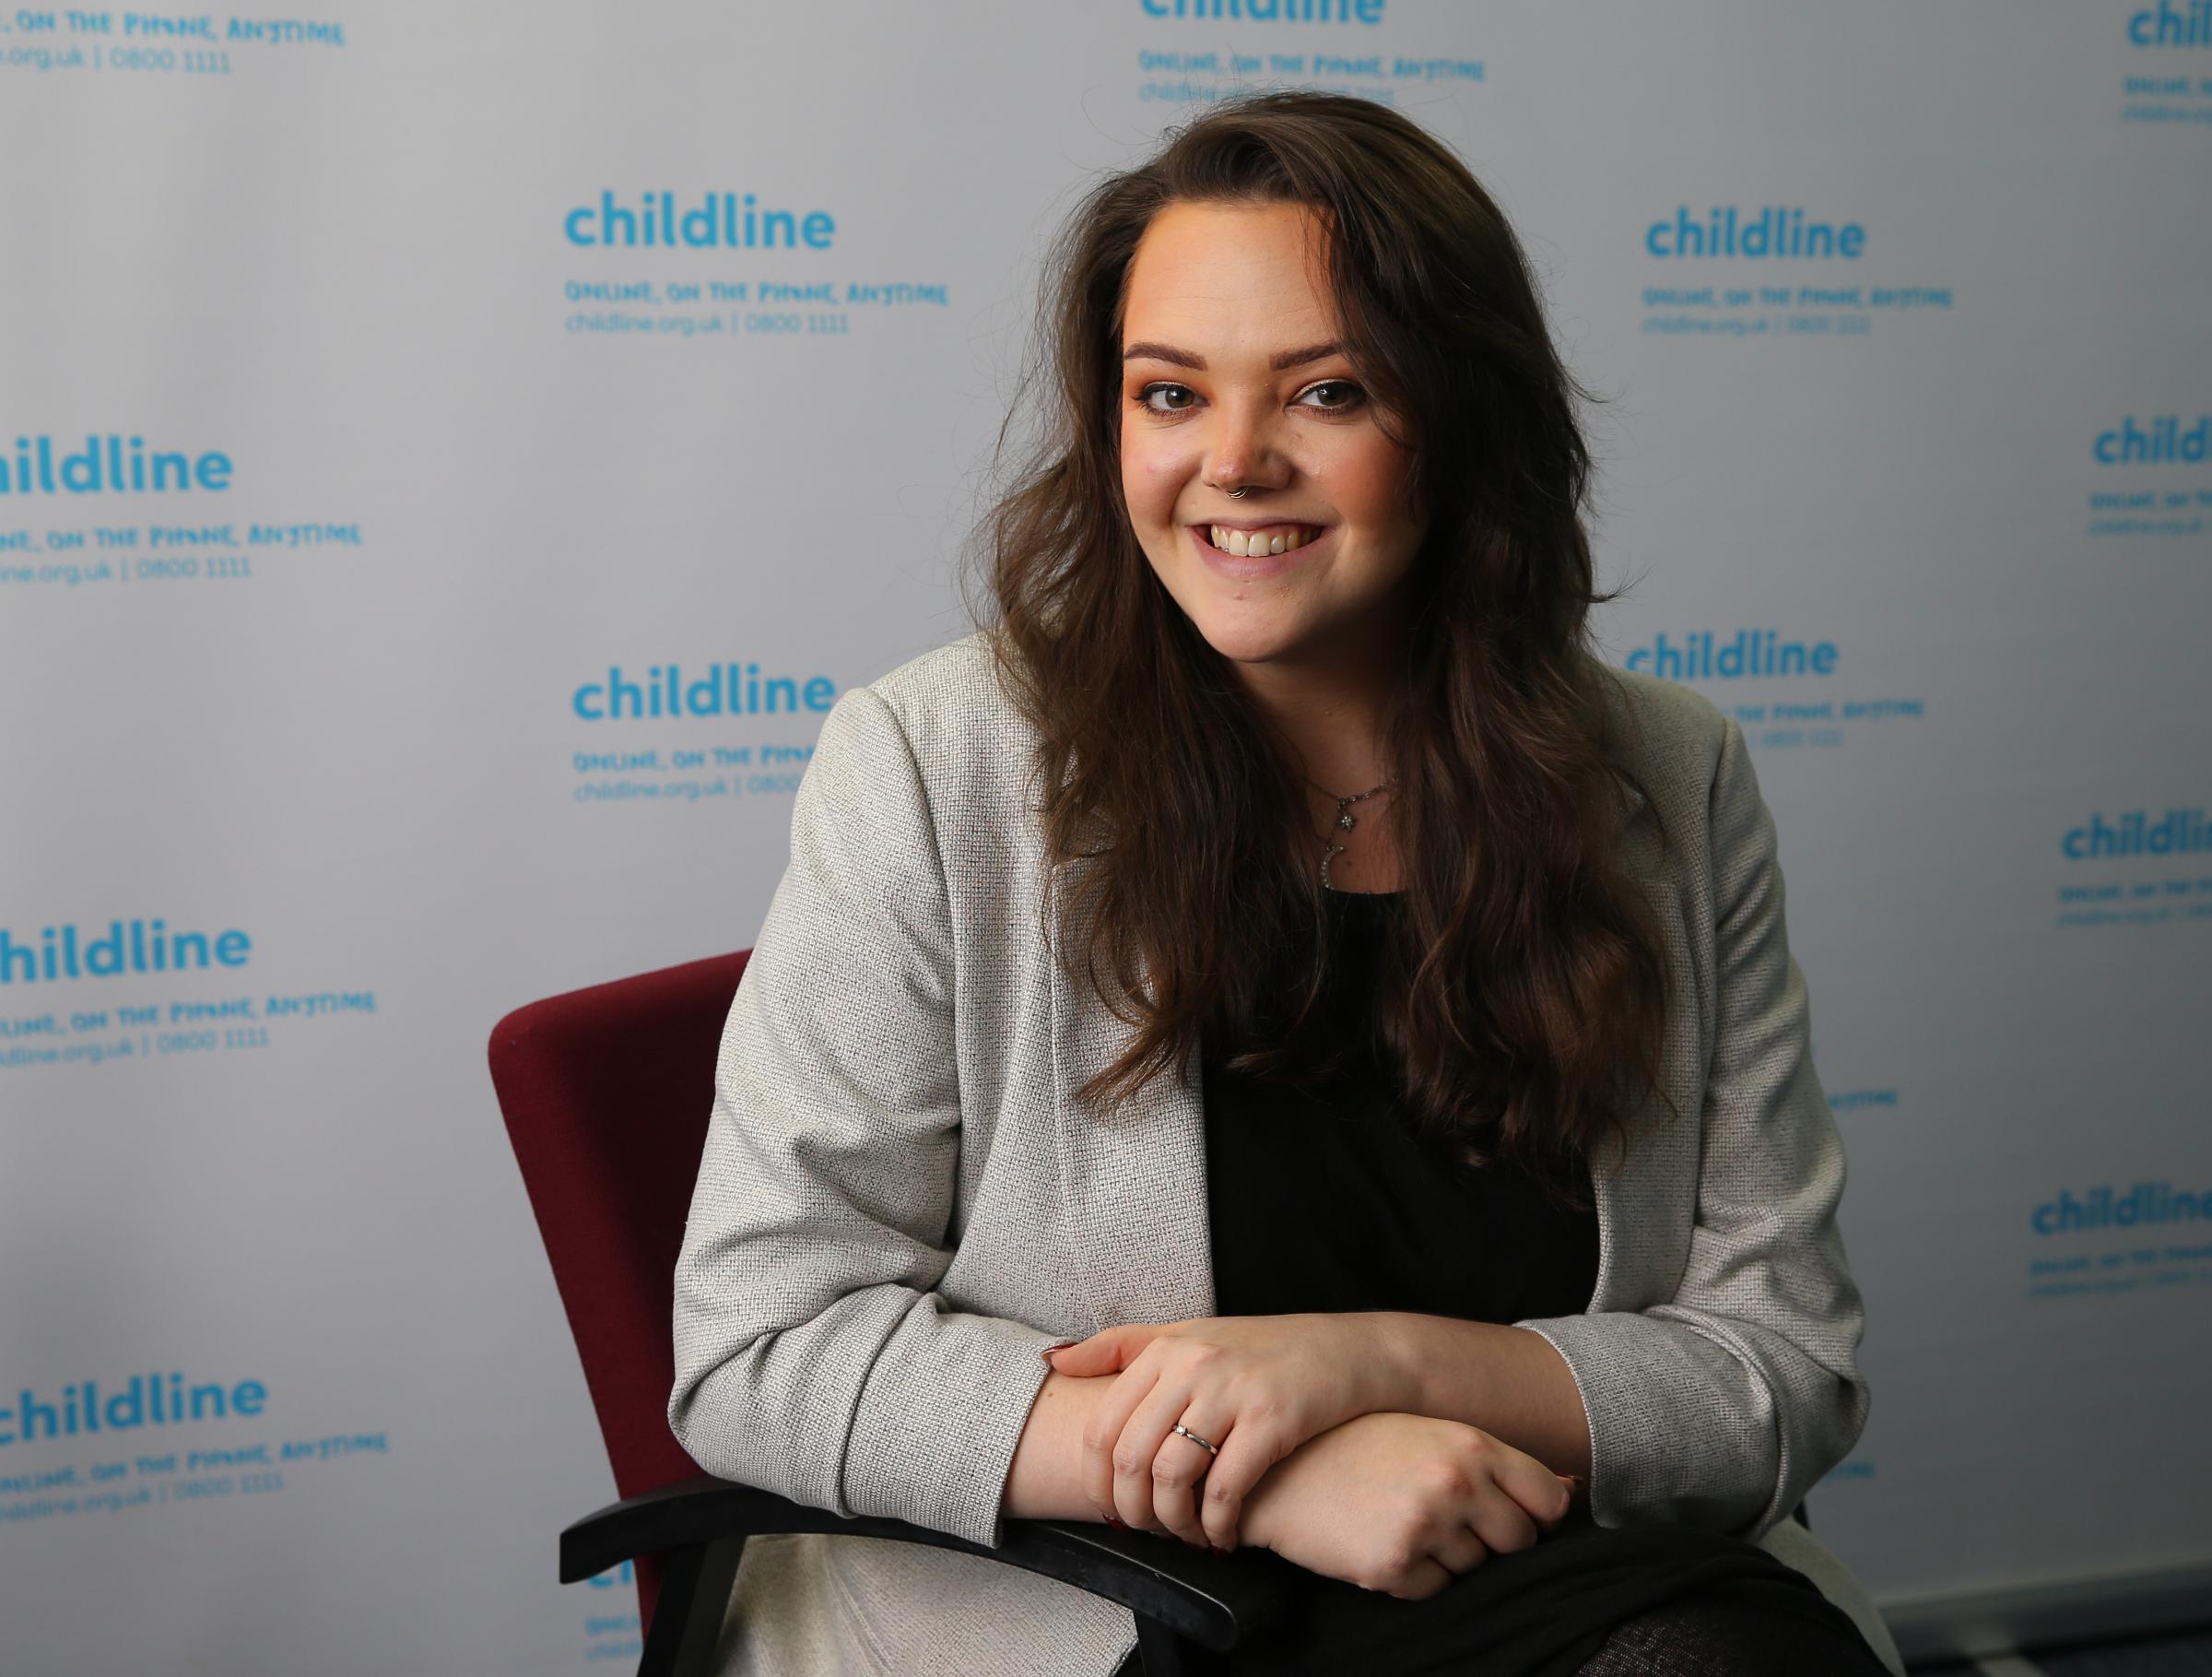 Lauren Burke, Childline team manager pictured at the Childline Glasgow base in Glasgow. Photograph by Colin Mearns 16 December 2021 For Glasgow Times, see story by Ruth Suter